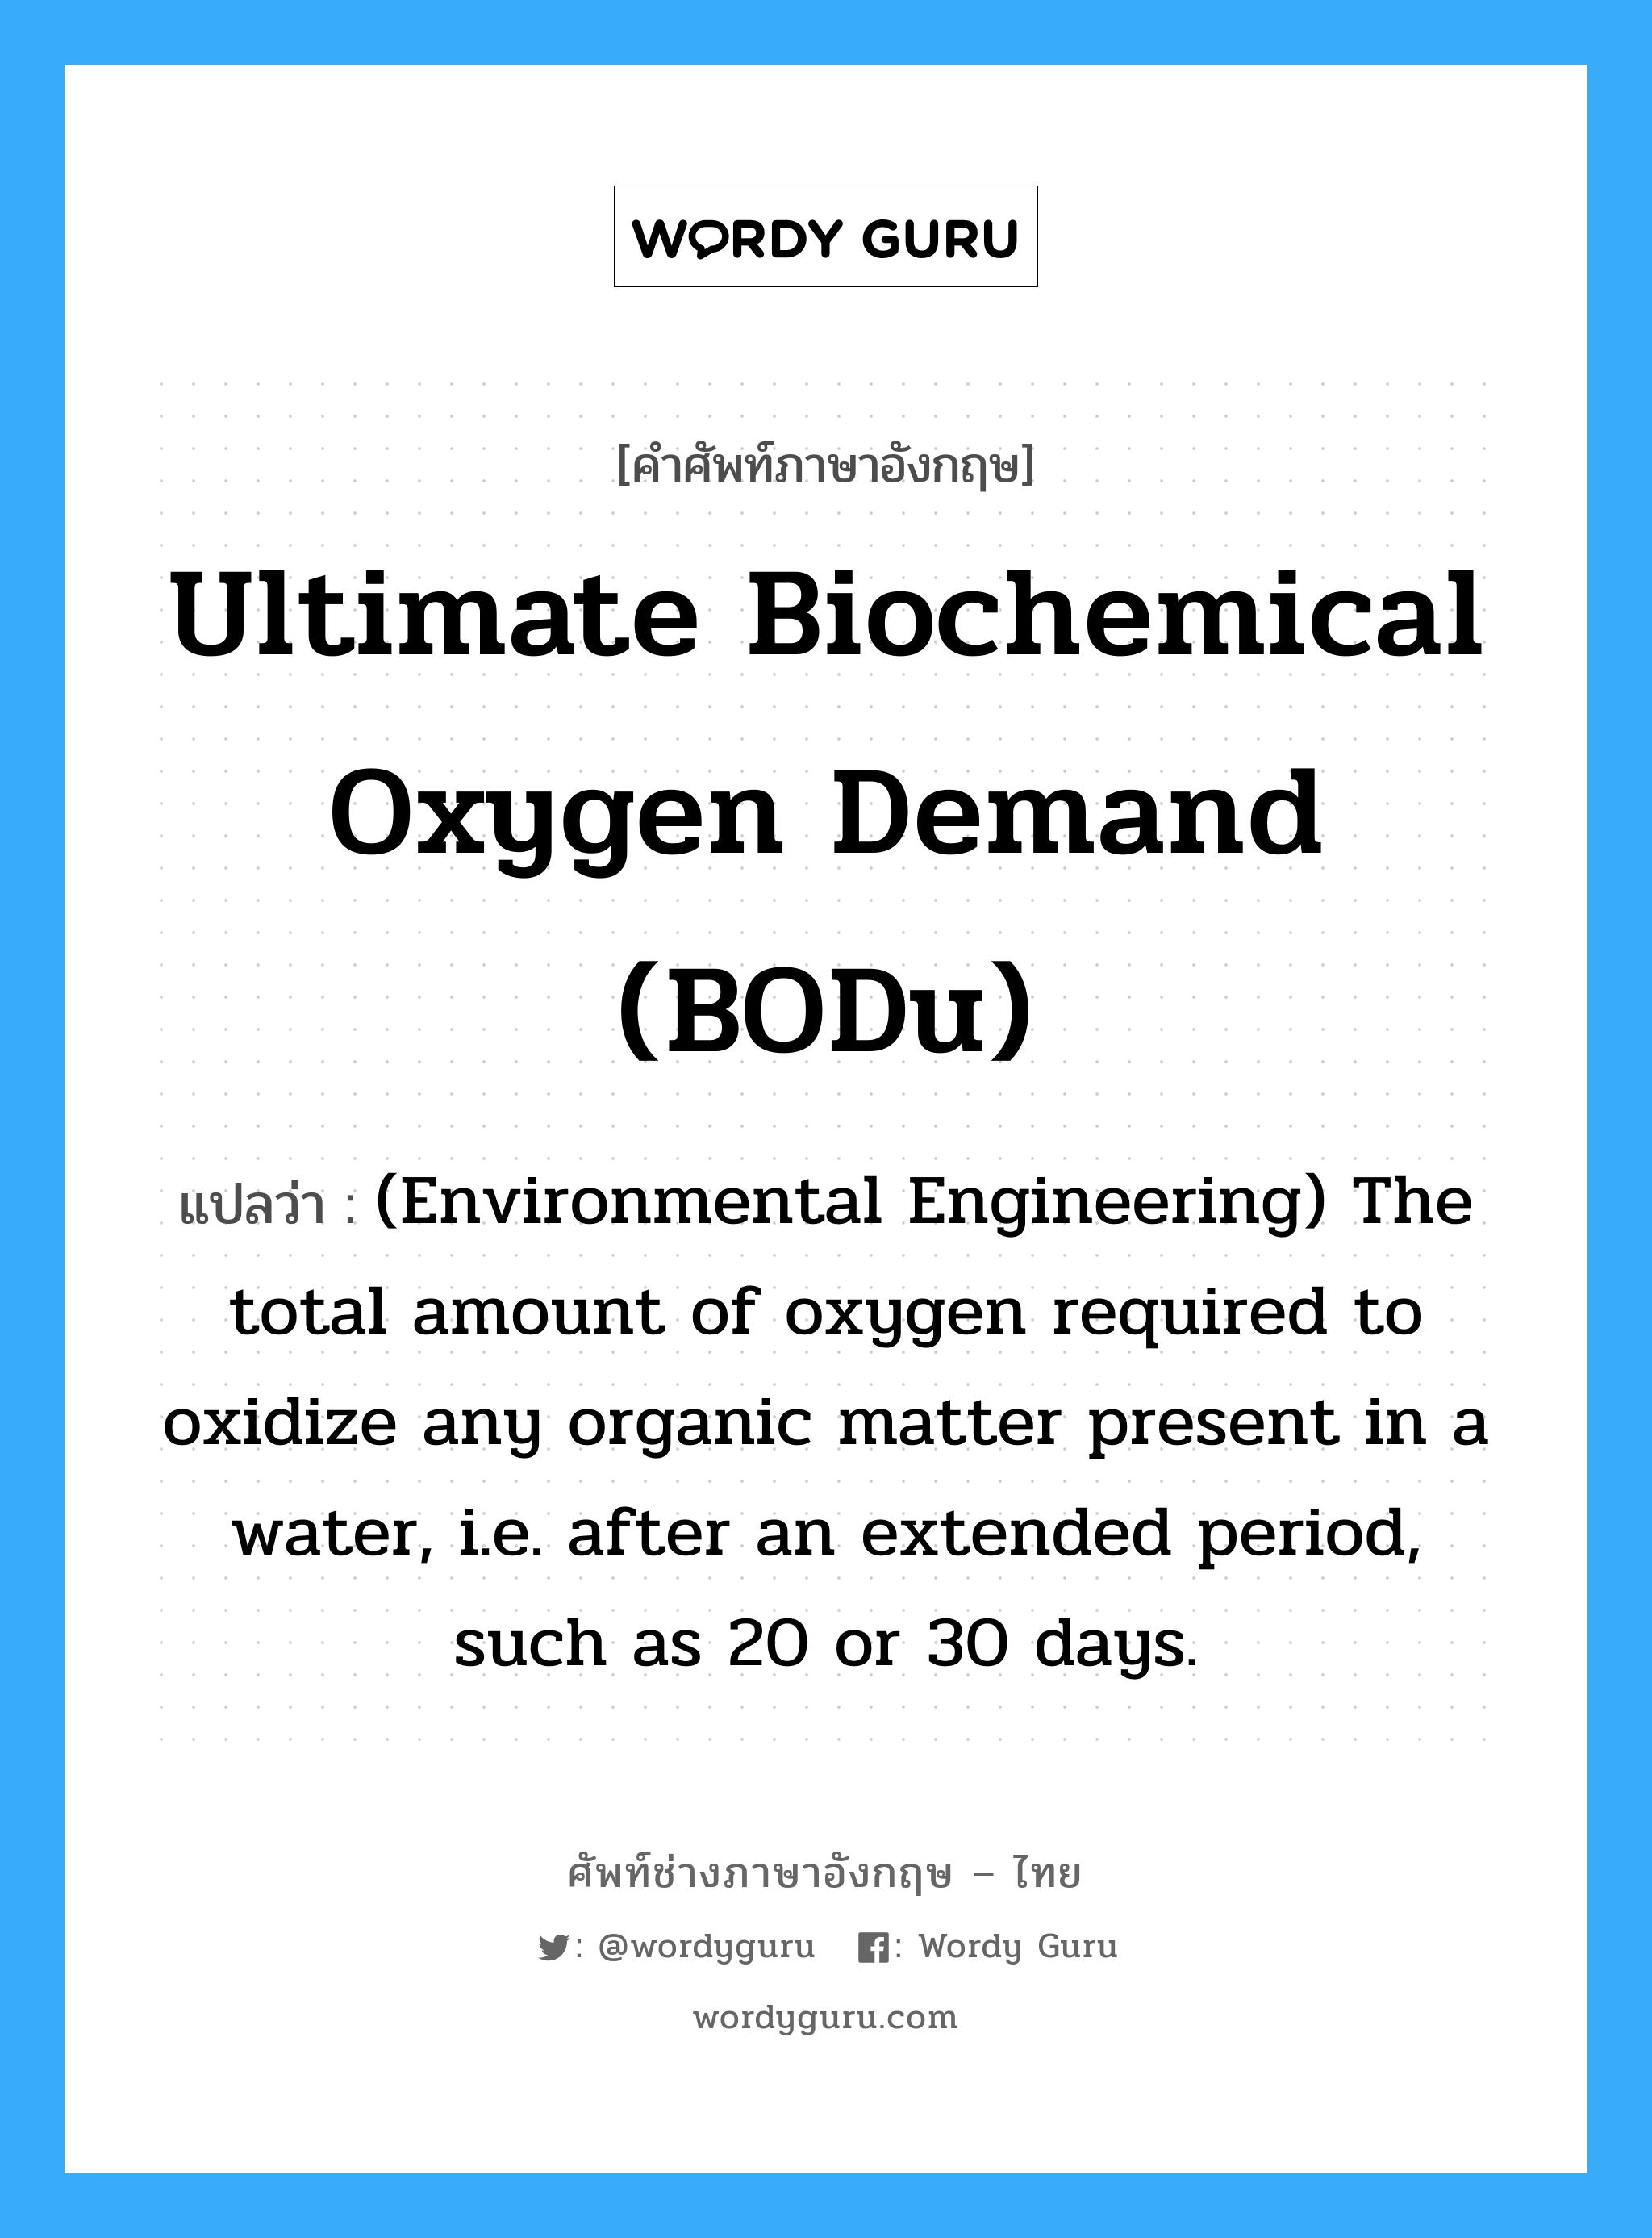 Ultimate biochemical oxygen demand (BODu) แปลว่า?, คำศัพท์ช่างภาษาอังกฤษ - ไทย Ultimate biochemical oxygen demand (BODu) คำศัพท์ภาษาอังกฤษ Ultimate biochemical oxygen demand (BODu) แปลว่า (Environmental Engineering) The total amount of oxygen required to oxidize any organic matter present in a water, i.e. after an extended period, such as 20 or 30 days.